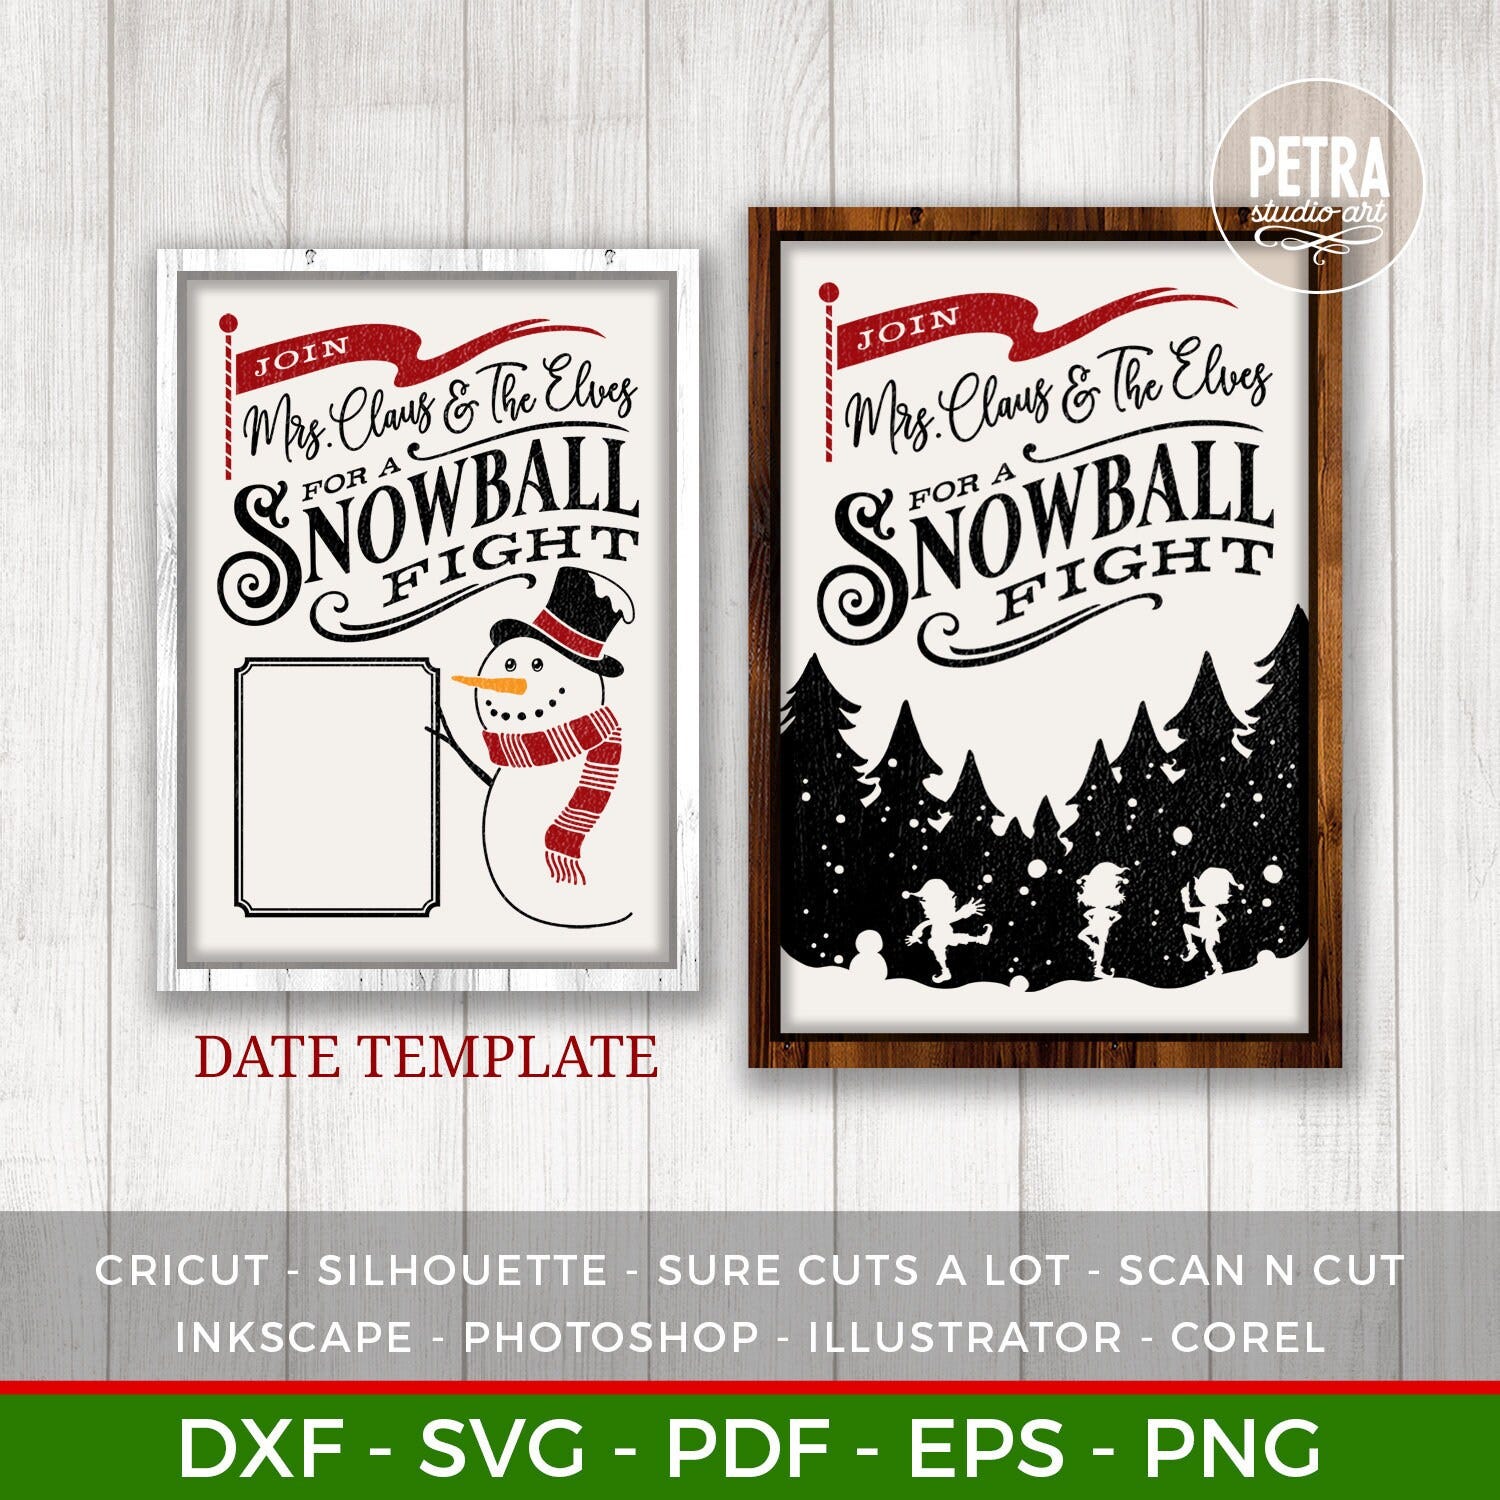 Christmas SVG. Join Mrs Claus and The Elves For A Snowball Fight SVG Cut File. Great for Crafting Christmas Home Decorations.